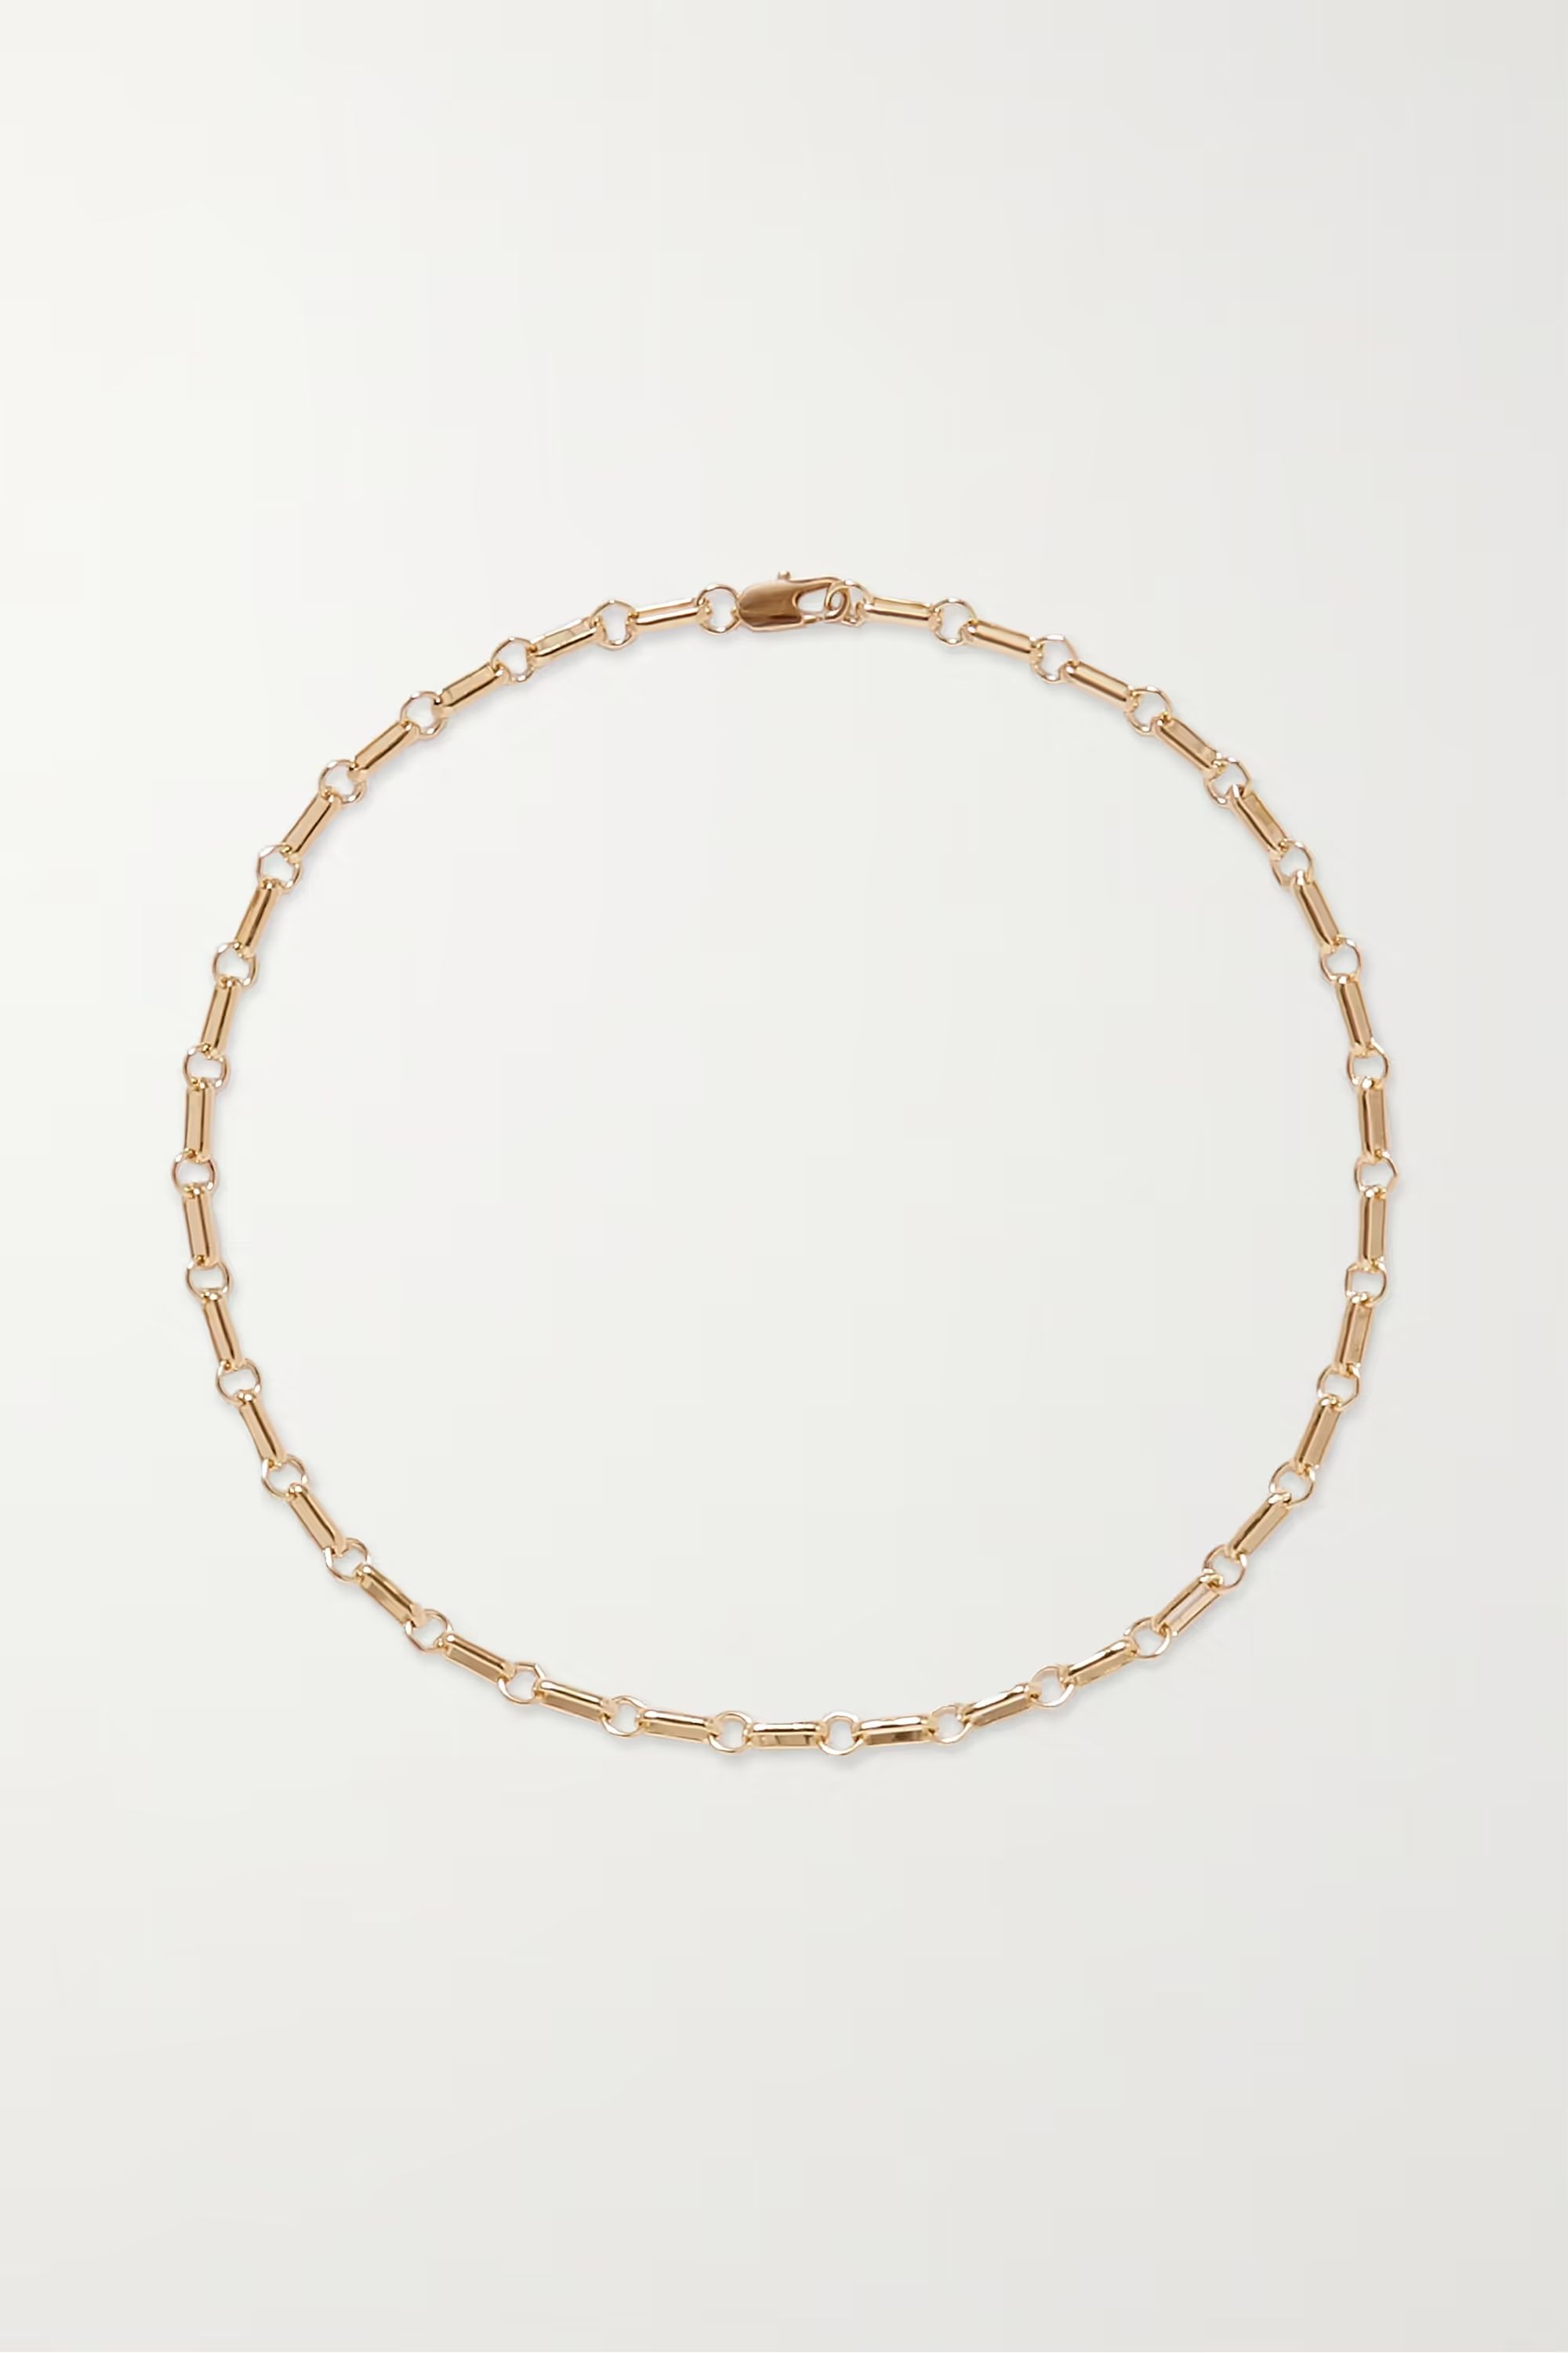 LAURA LOMBARDIGold-plated necklace | NET-A-PORTER (US)